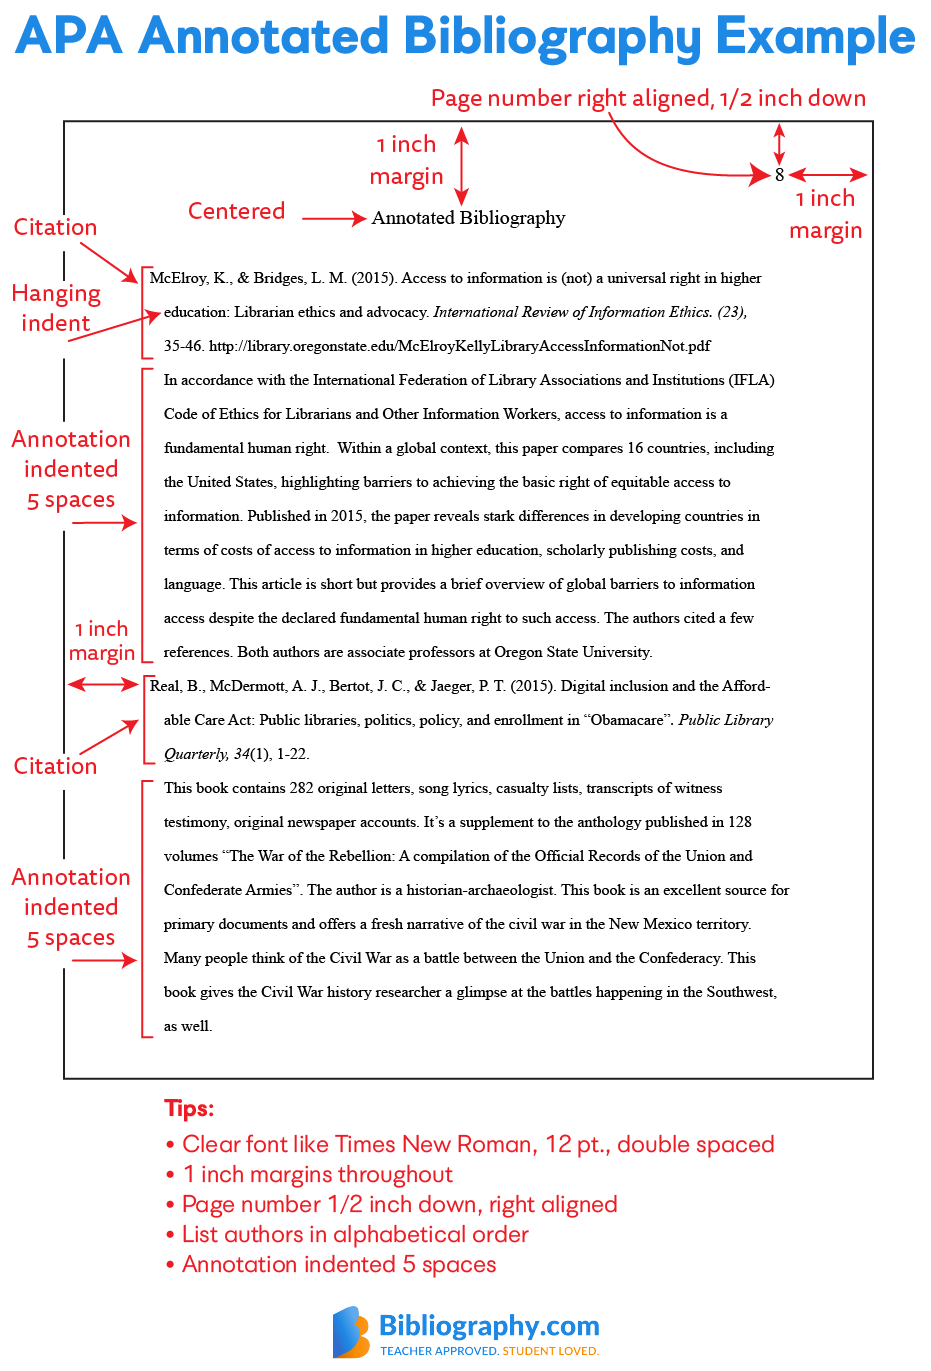 annotated bibliography abstract example apa